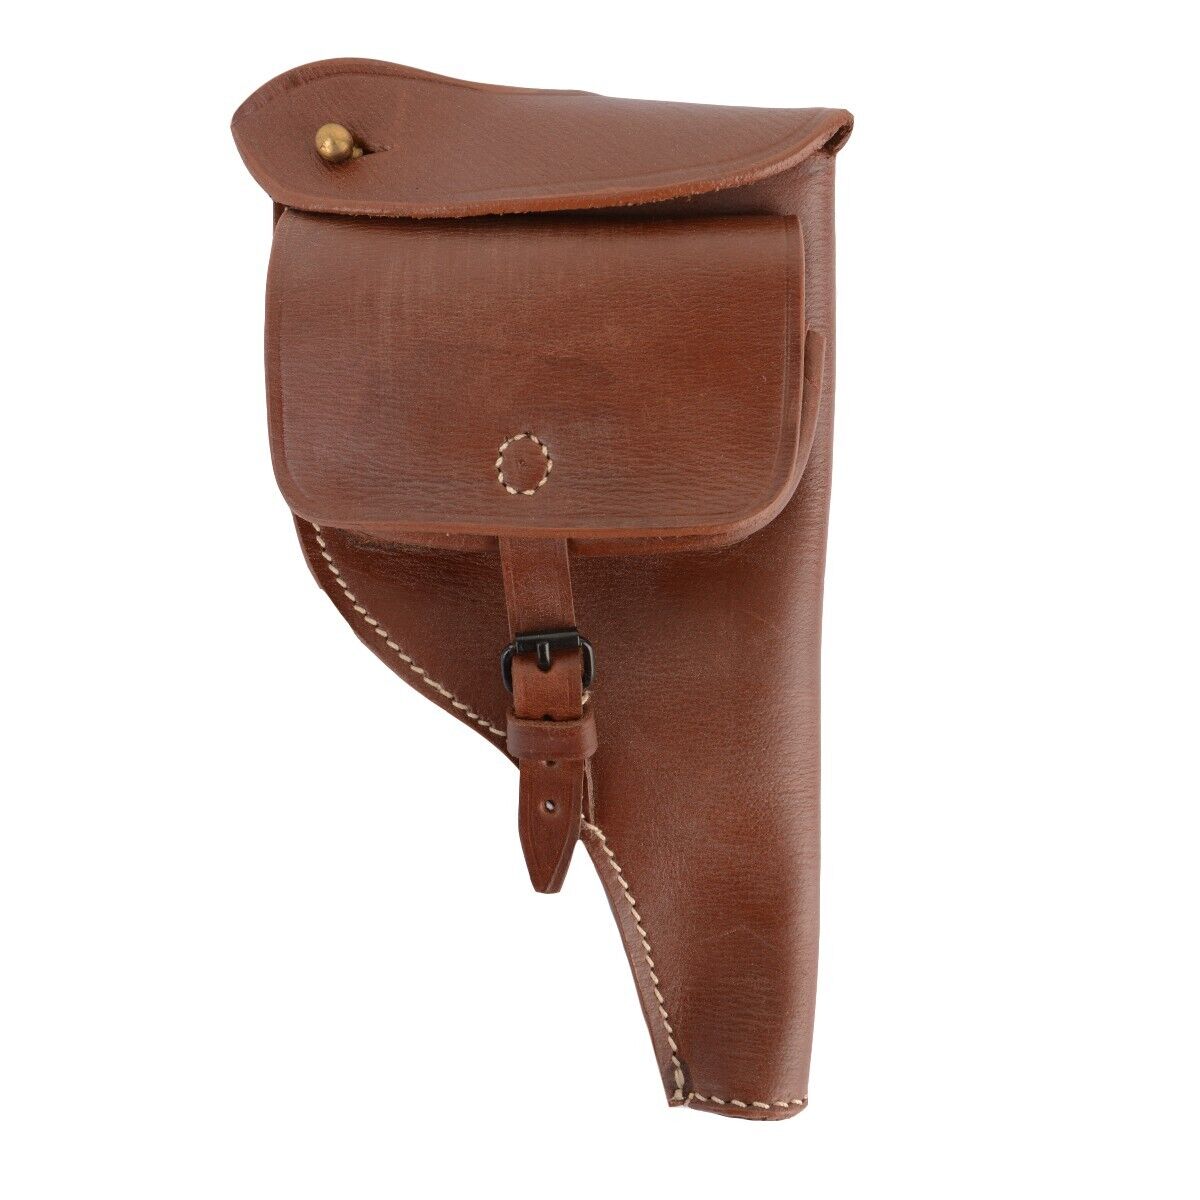 Reproduction WW1 German M1883 Reichsrevolver M91 Leather Holster